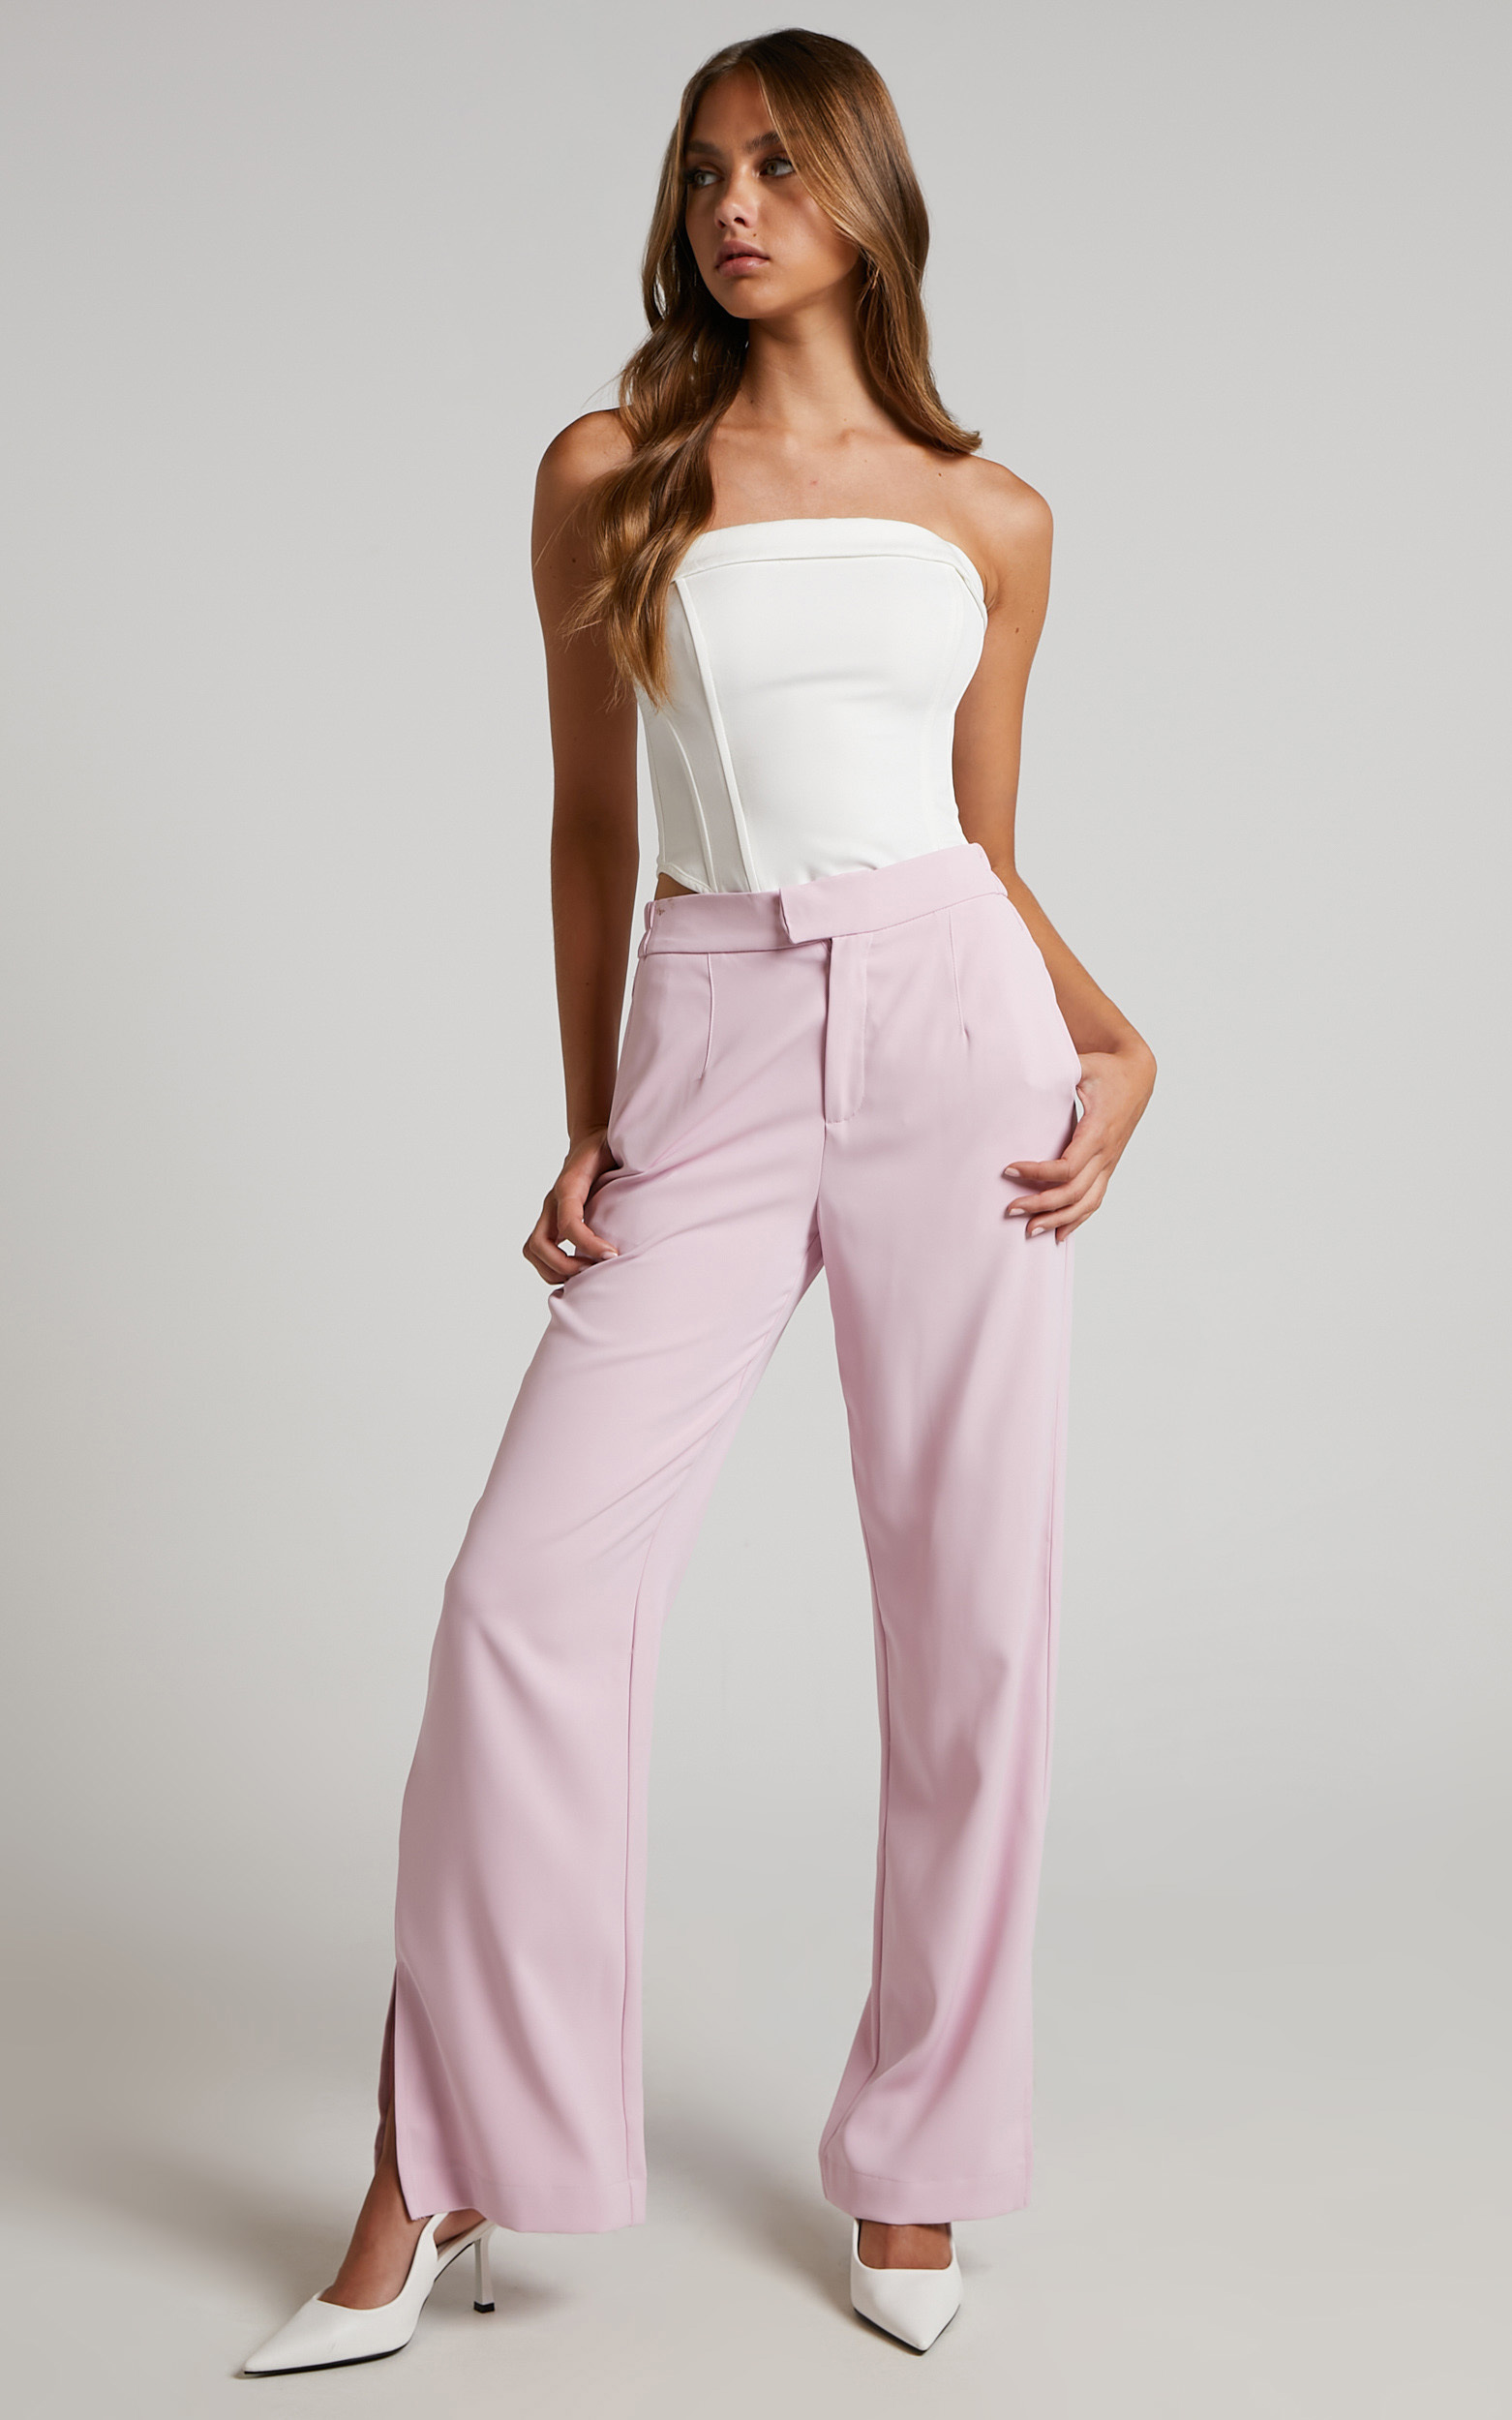 Mhina Trousers - Mid Rise Split Hem Tailored Trousers in Pink - 10, PNK1, hi-res image number null